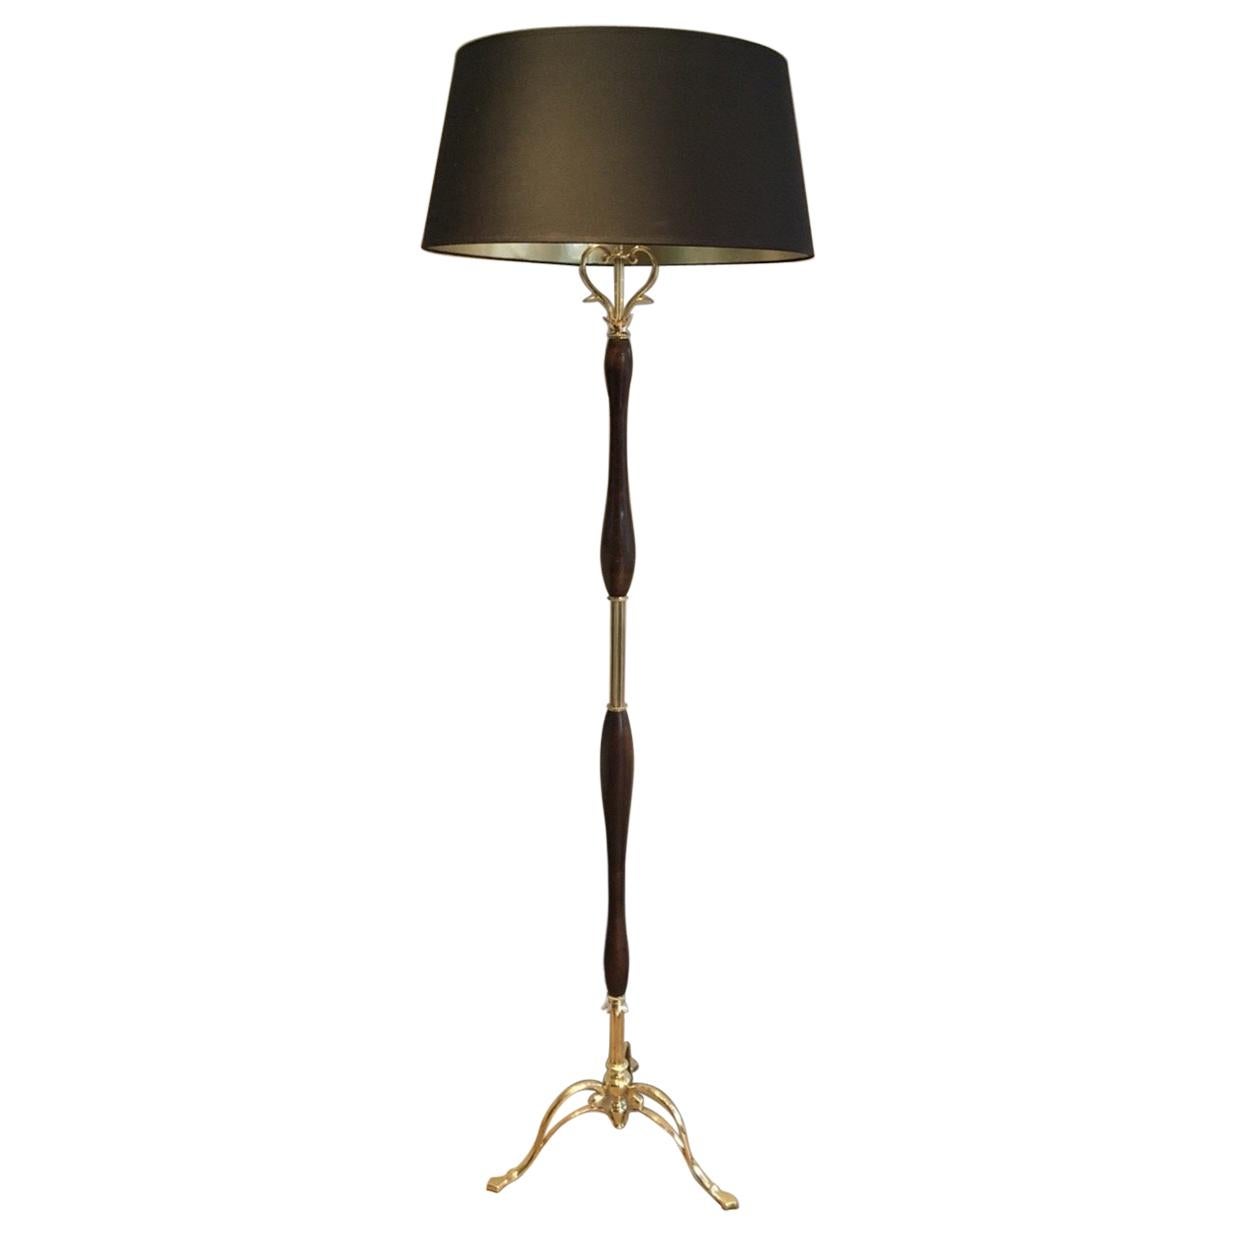 Unusual Gold Gilt Brass and Wood Floor Lamp, French, circa 1940